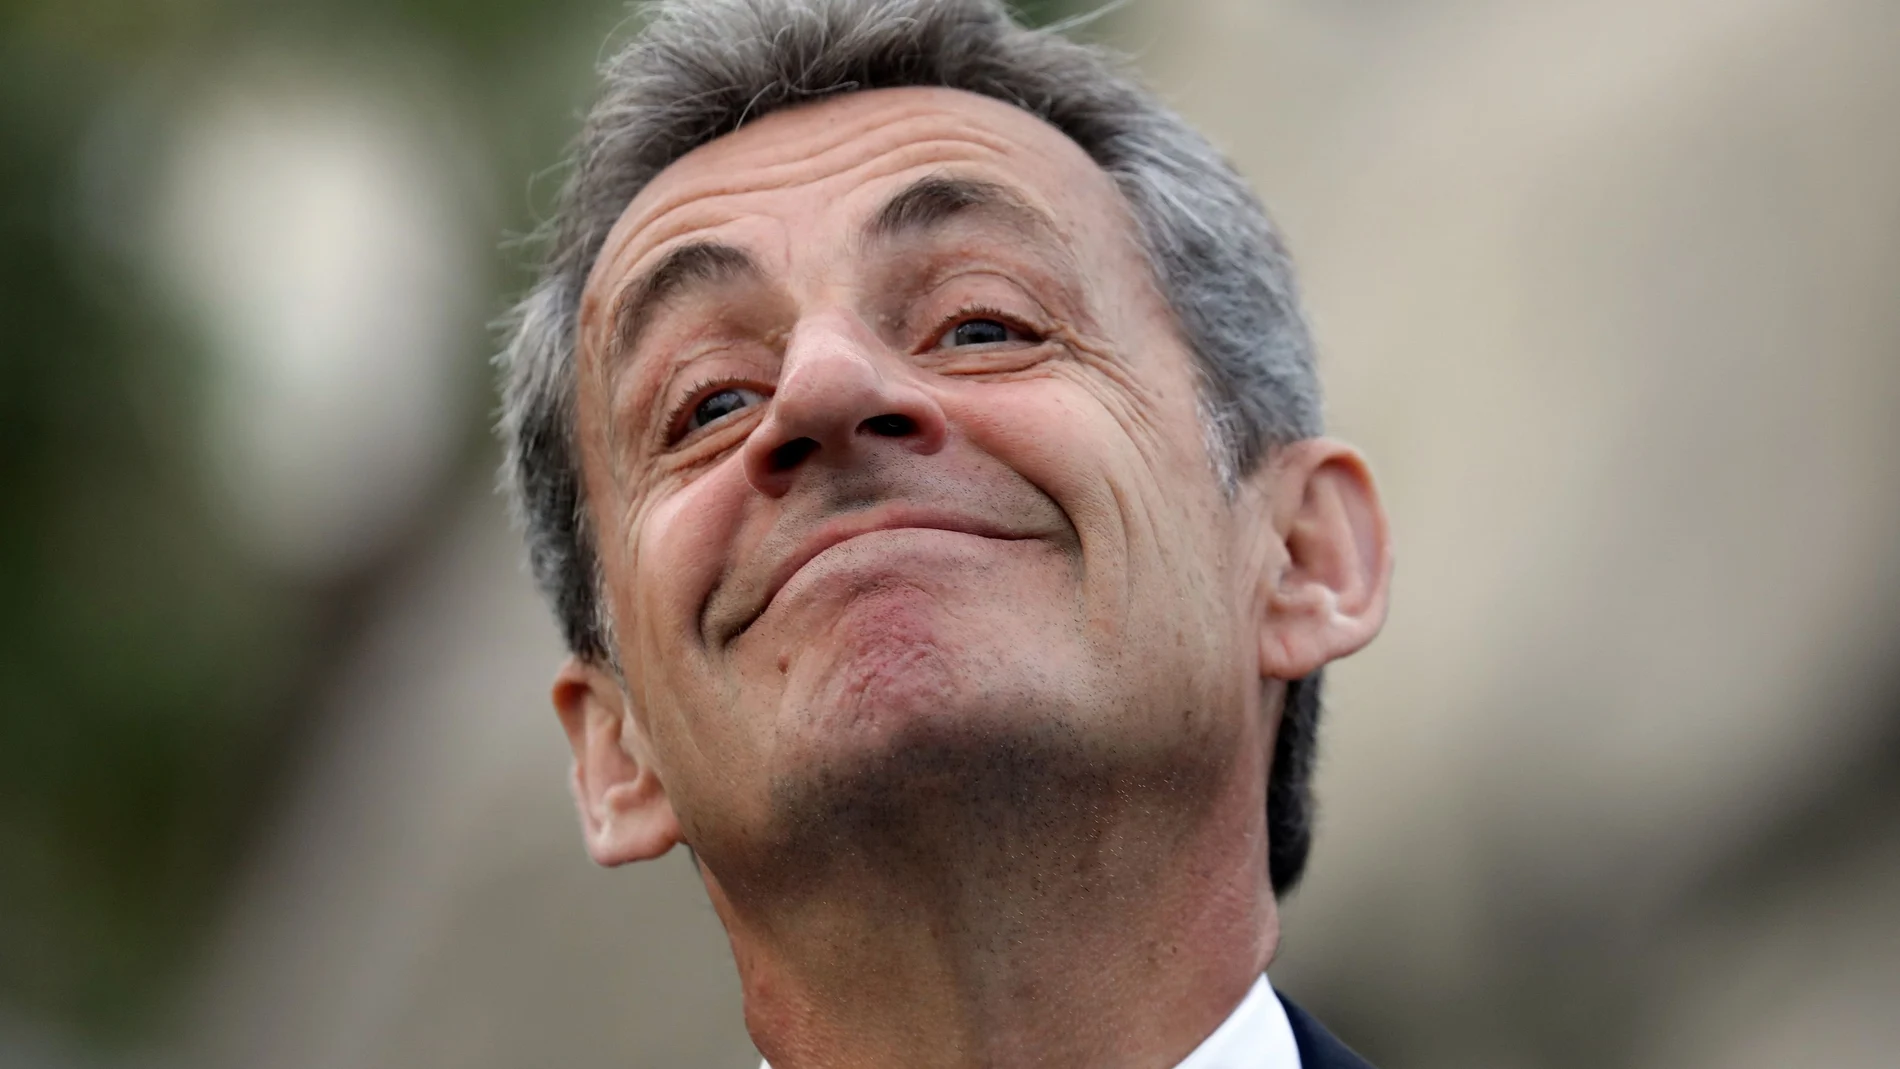 Former French President Nicolas Sarkozy is pictured during a visit in Nice.